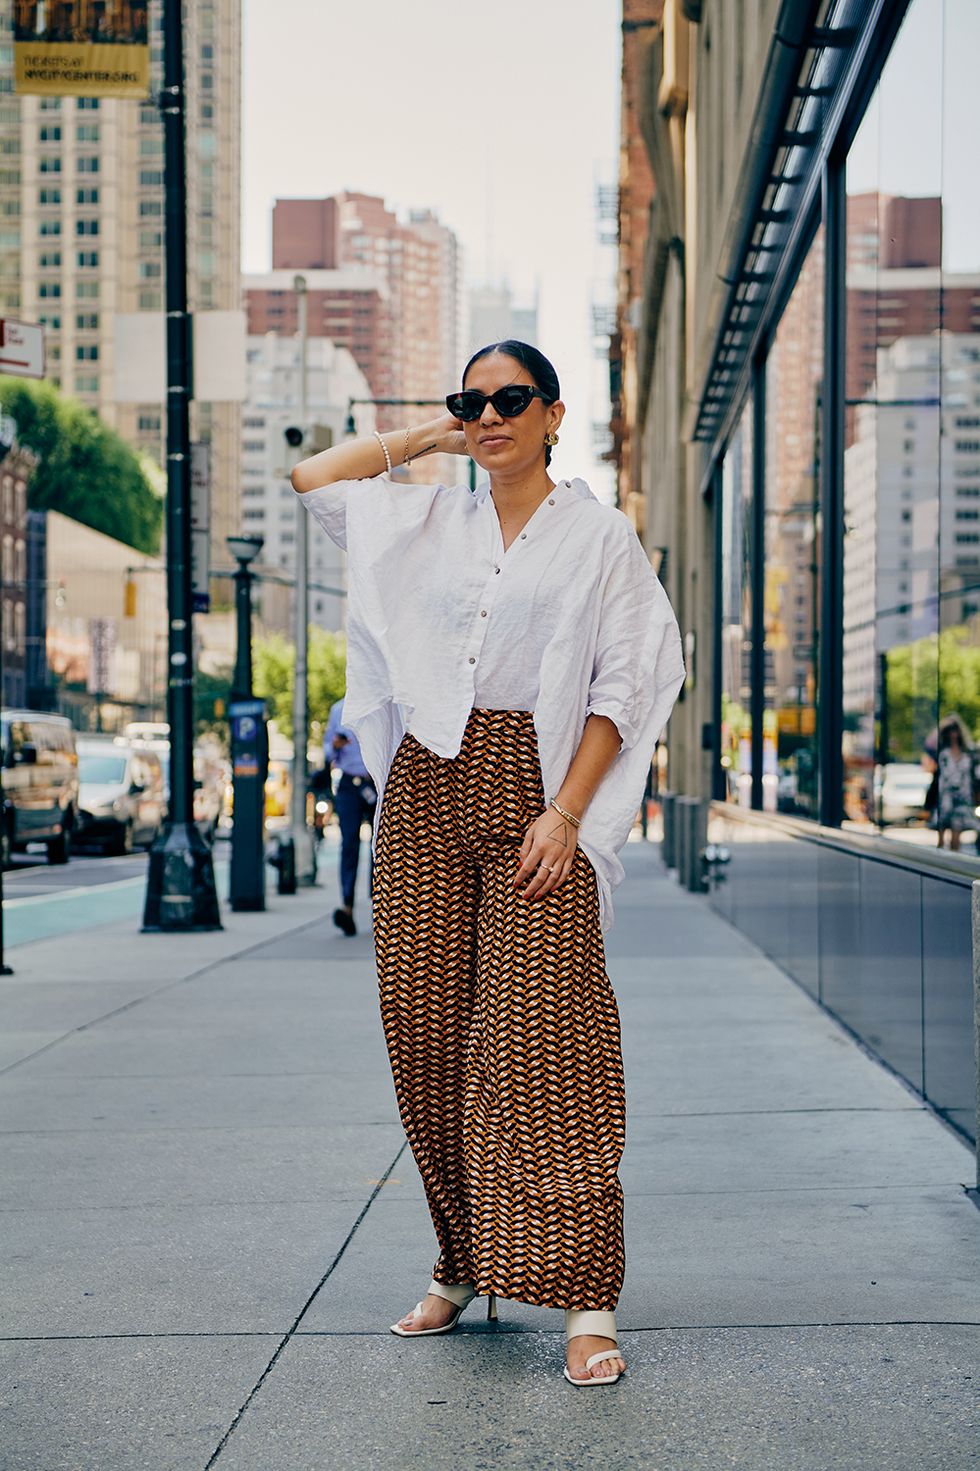 5 Classic Outfit Combos That Always Work + LOTS of Examples  Classic  outfits, Business casual outfits for work, Business casual outfits for women